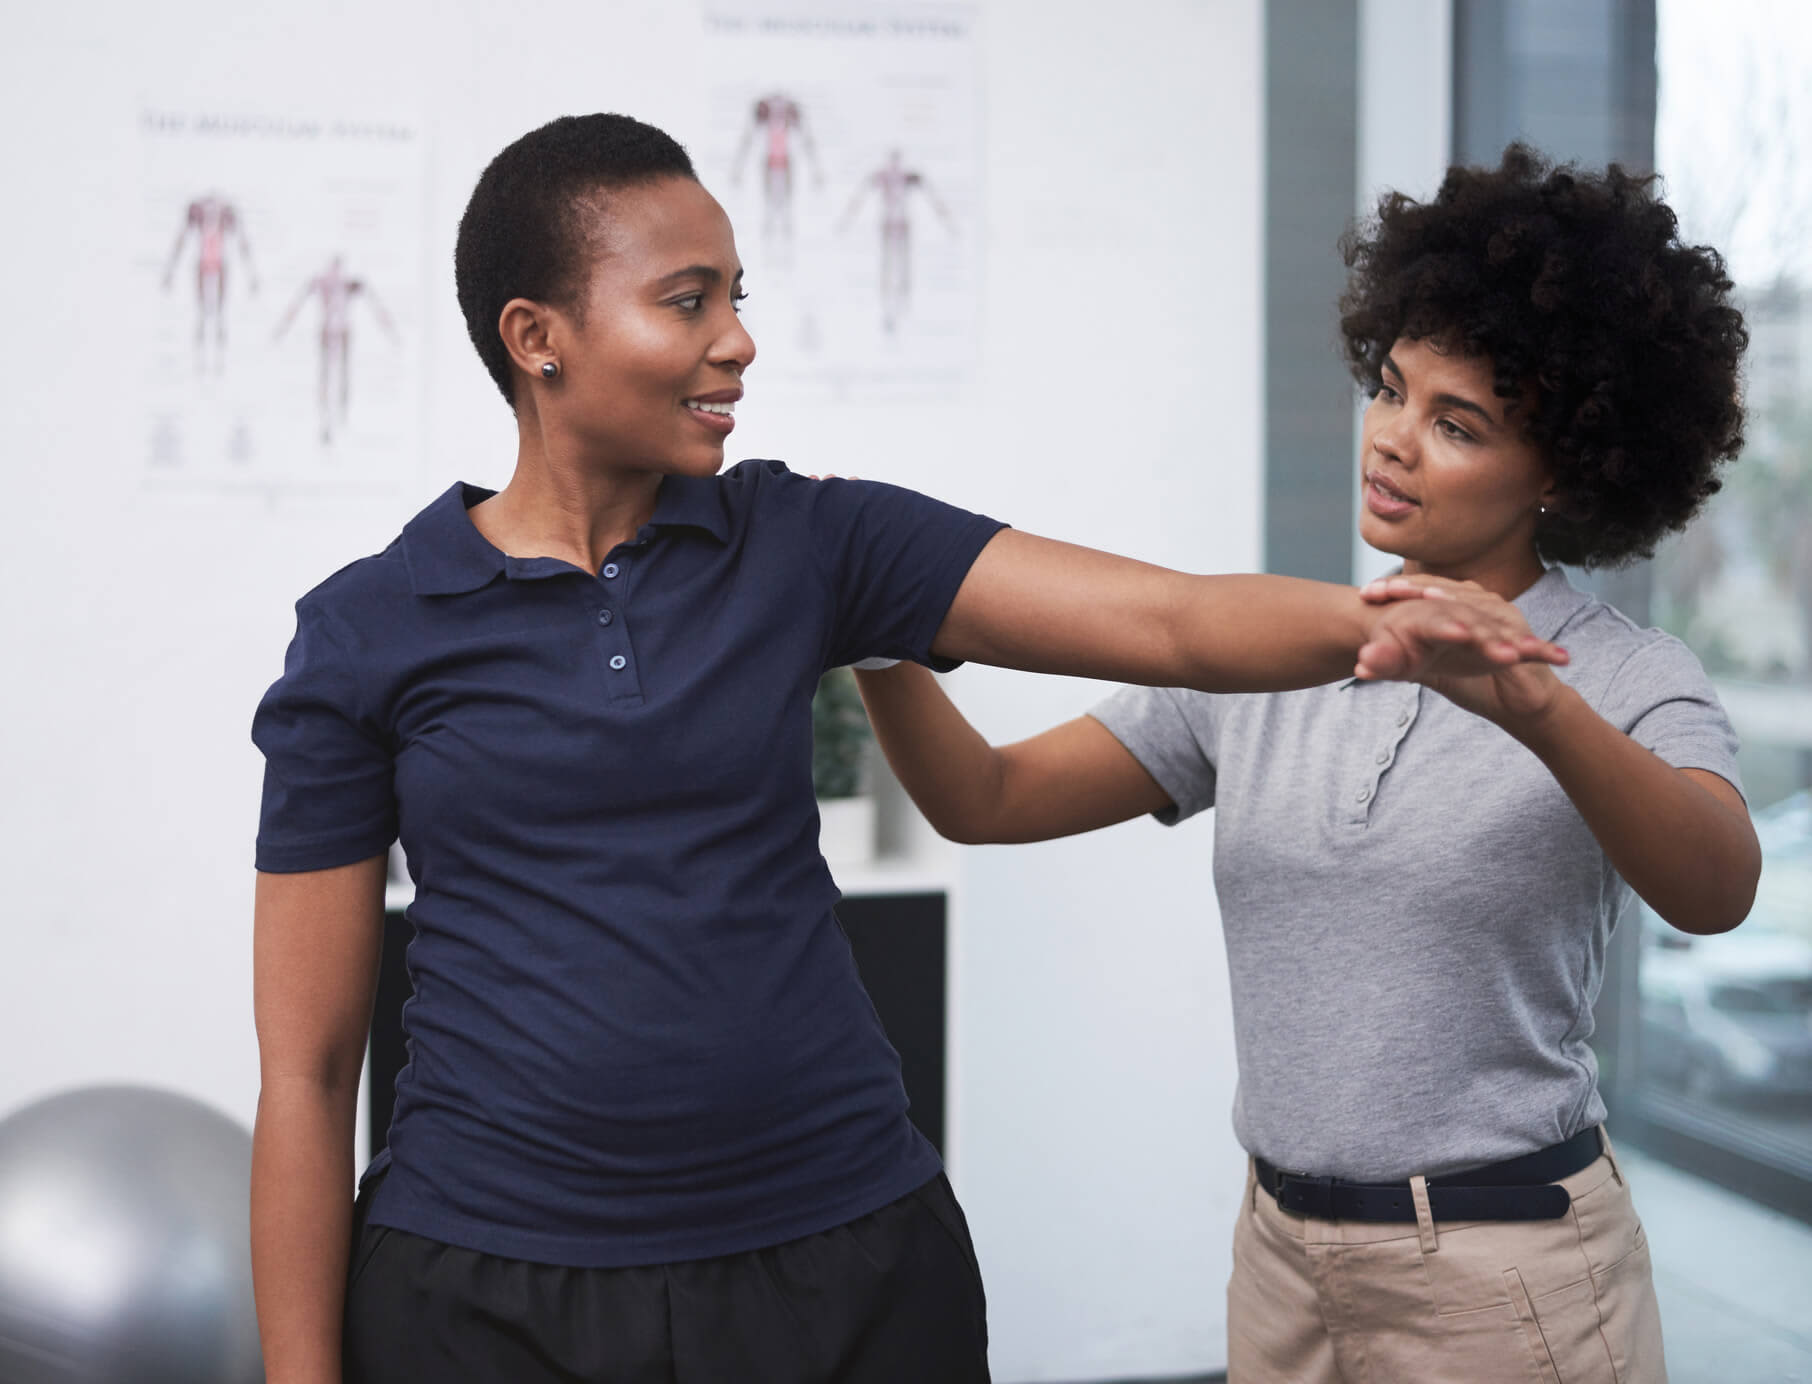 A Black female physical therapist is helping her senior patient with arm exercises during a physical therapy session.